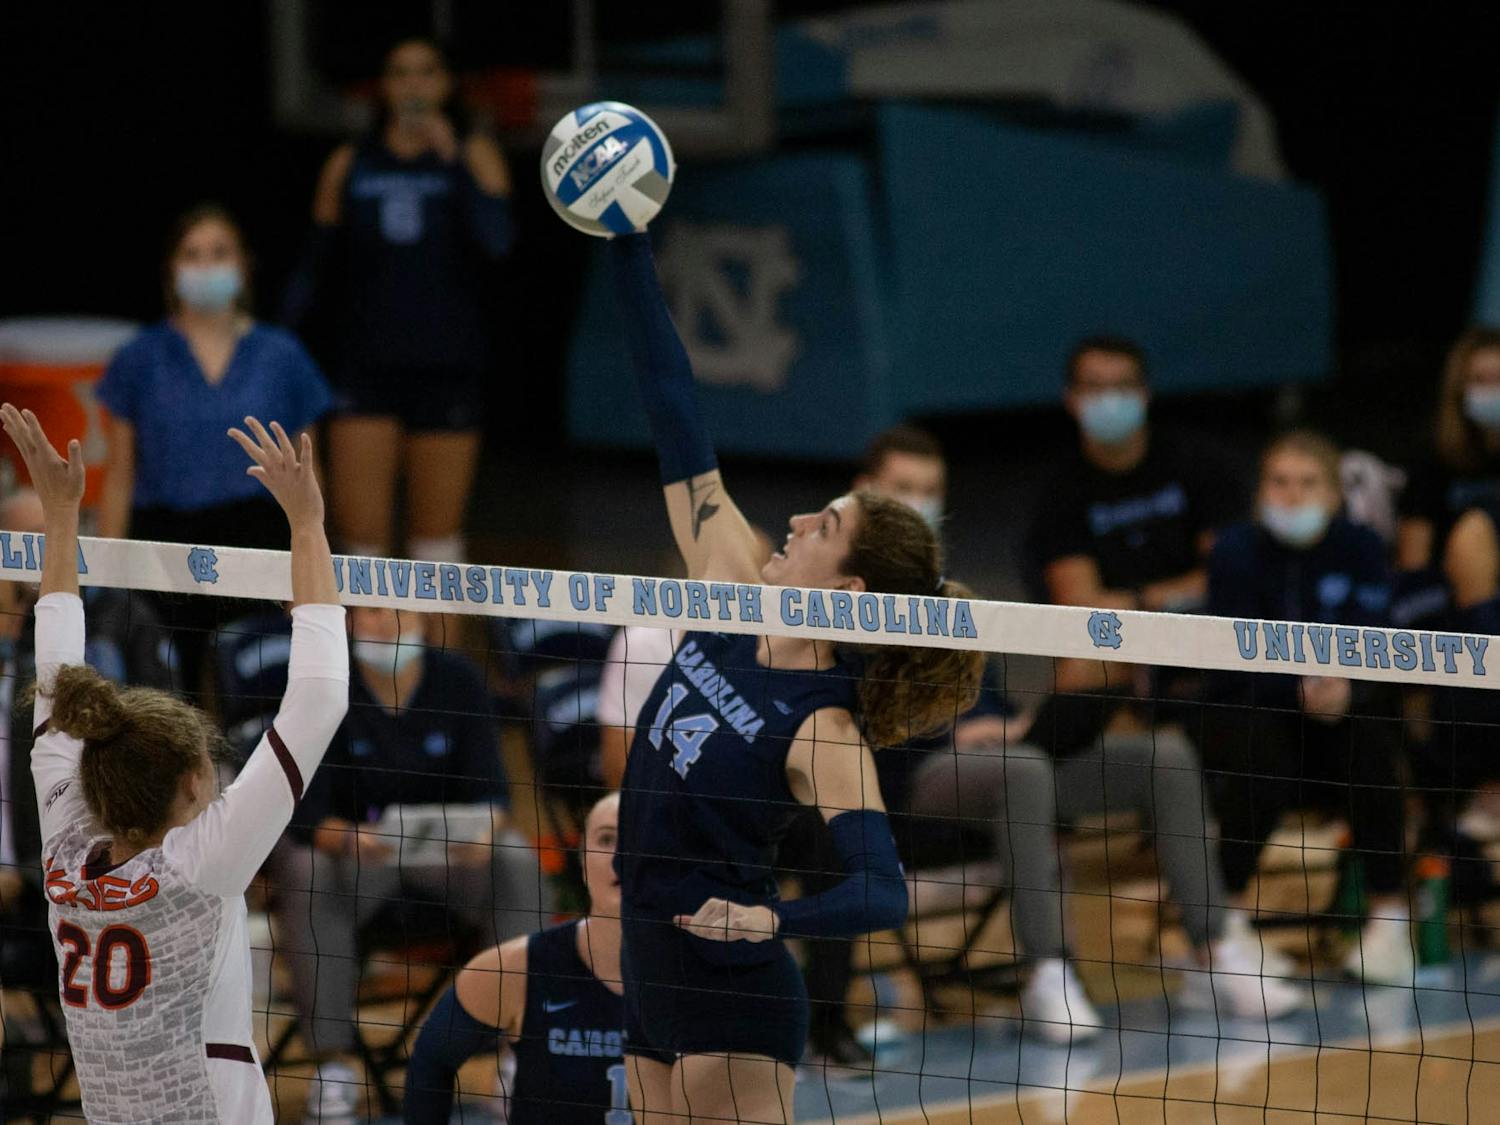 Sophomore middle and outside hitter Kaya Merkler (14) jumps to spike the ball in the UNC Women's volleyball game against Virginia Tech at the Woolen Gymnasium on Oct. 10. The Heels won 3-0.